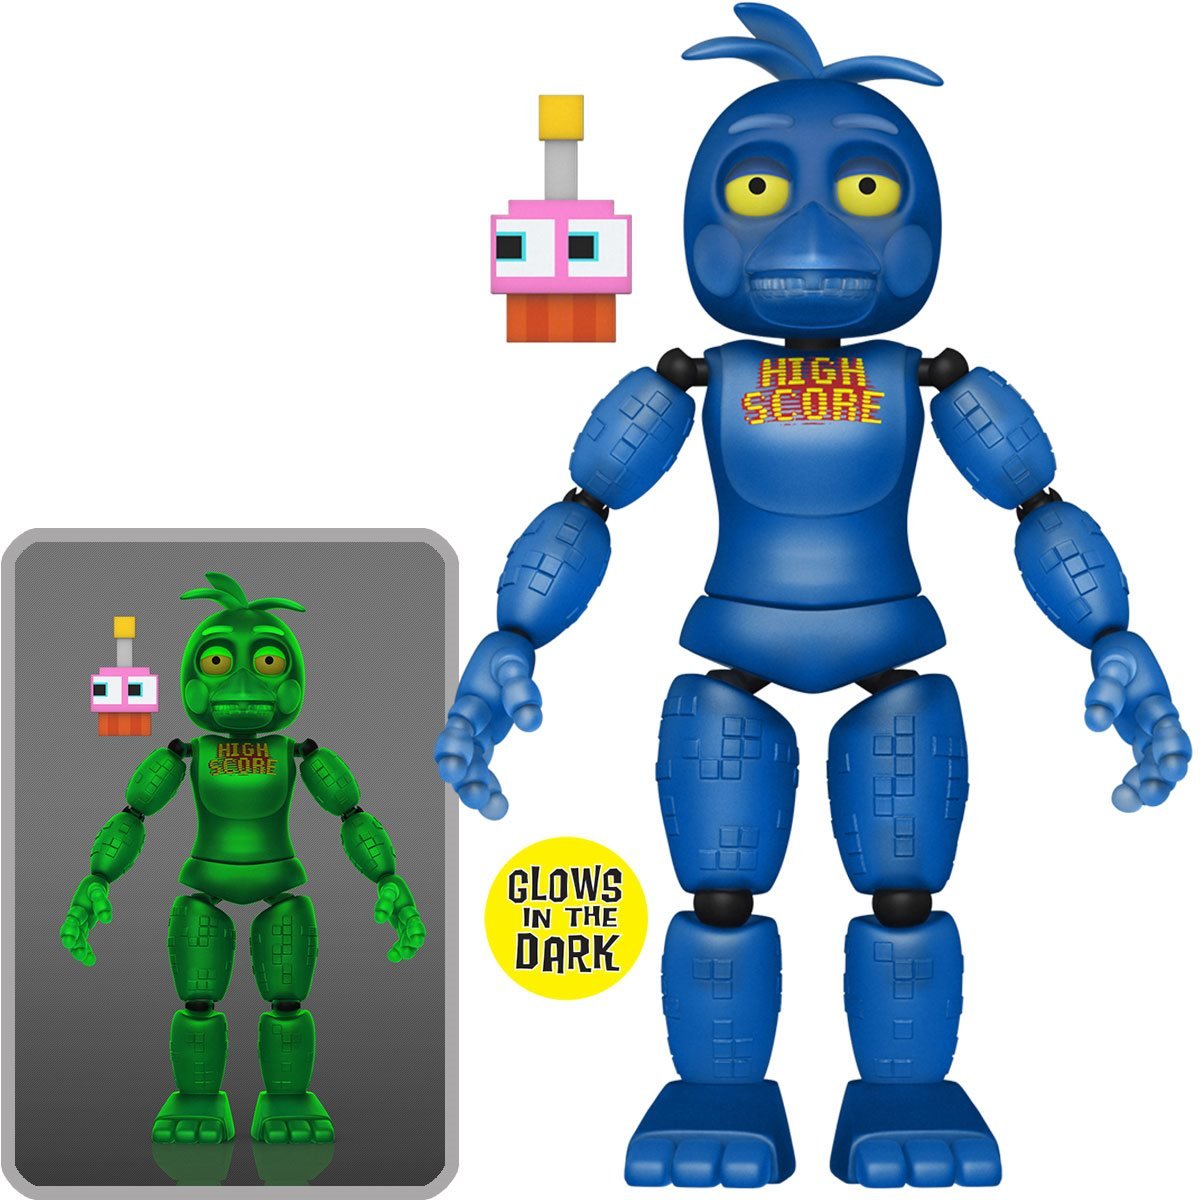 New Five Nights at Freddy's Animatronic Chocolate Action Figures